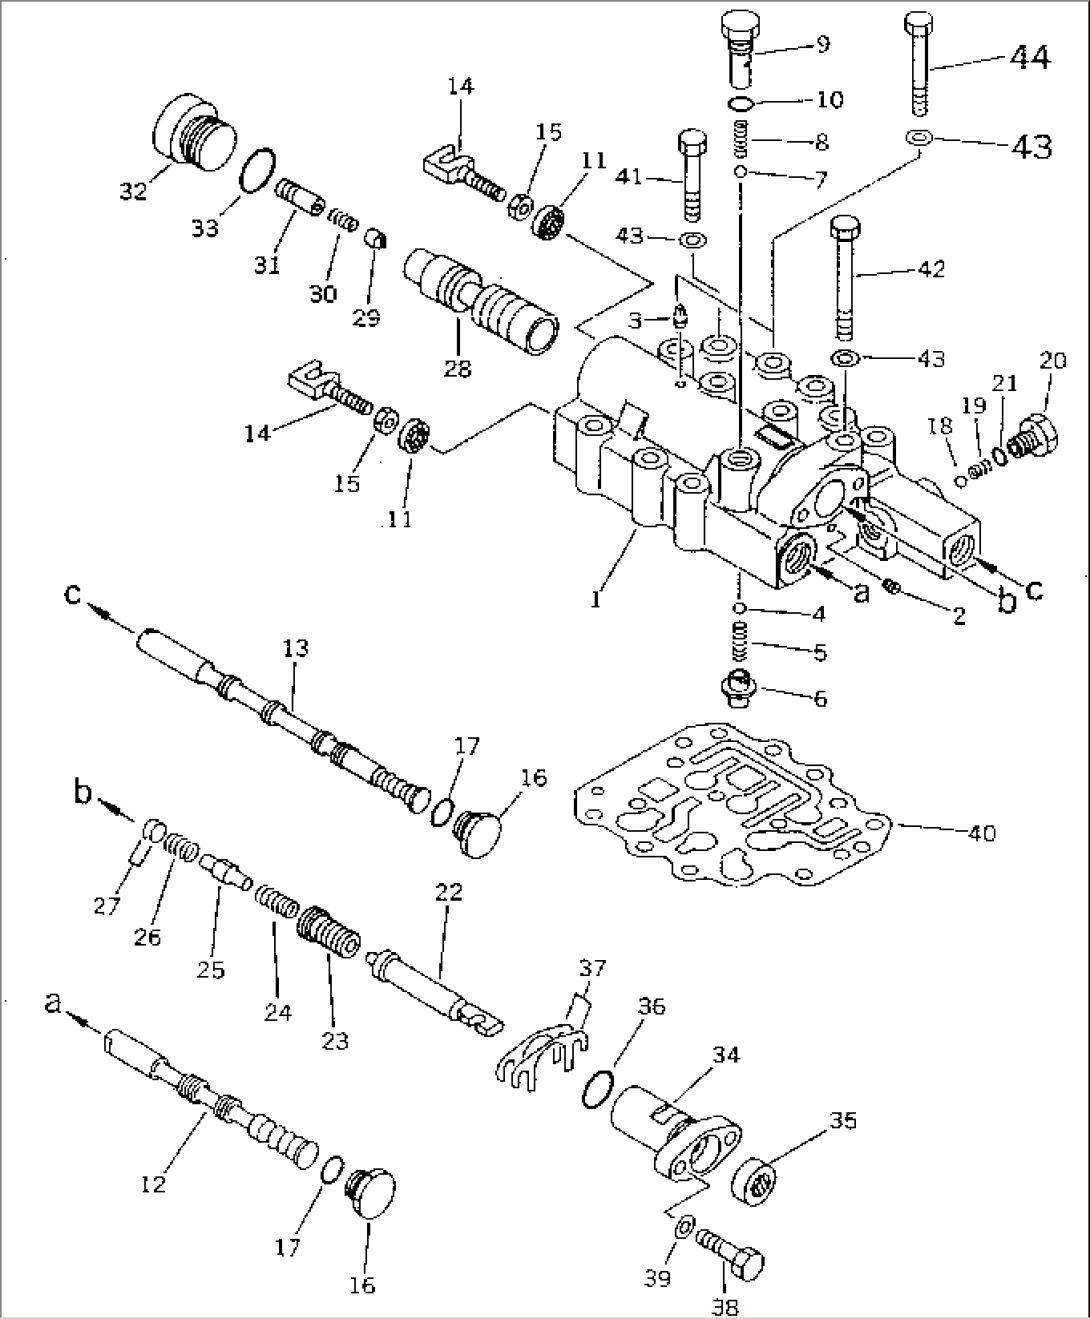 TRANSMISSION VALVE (F2-R2) (SELECTOR AND INCHING) (FOR TWO LEVERS STEERING)